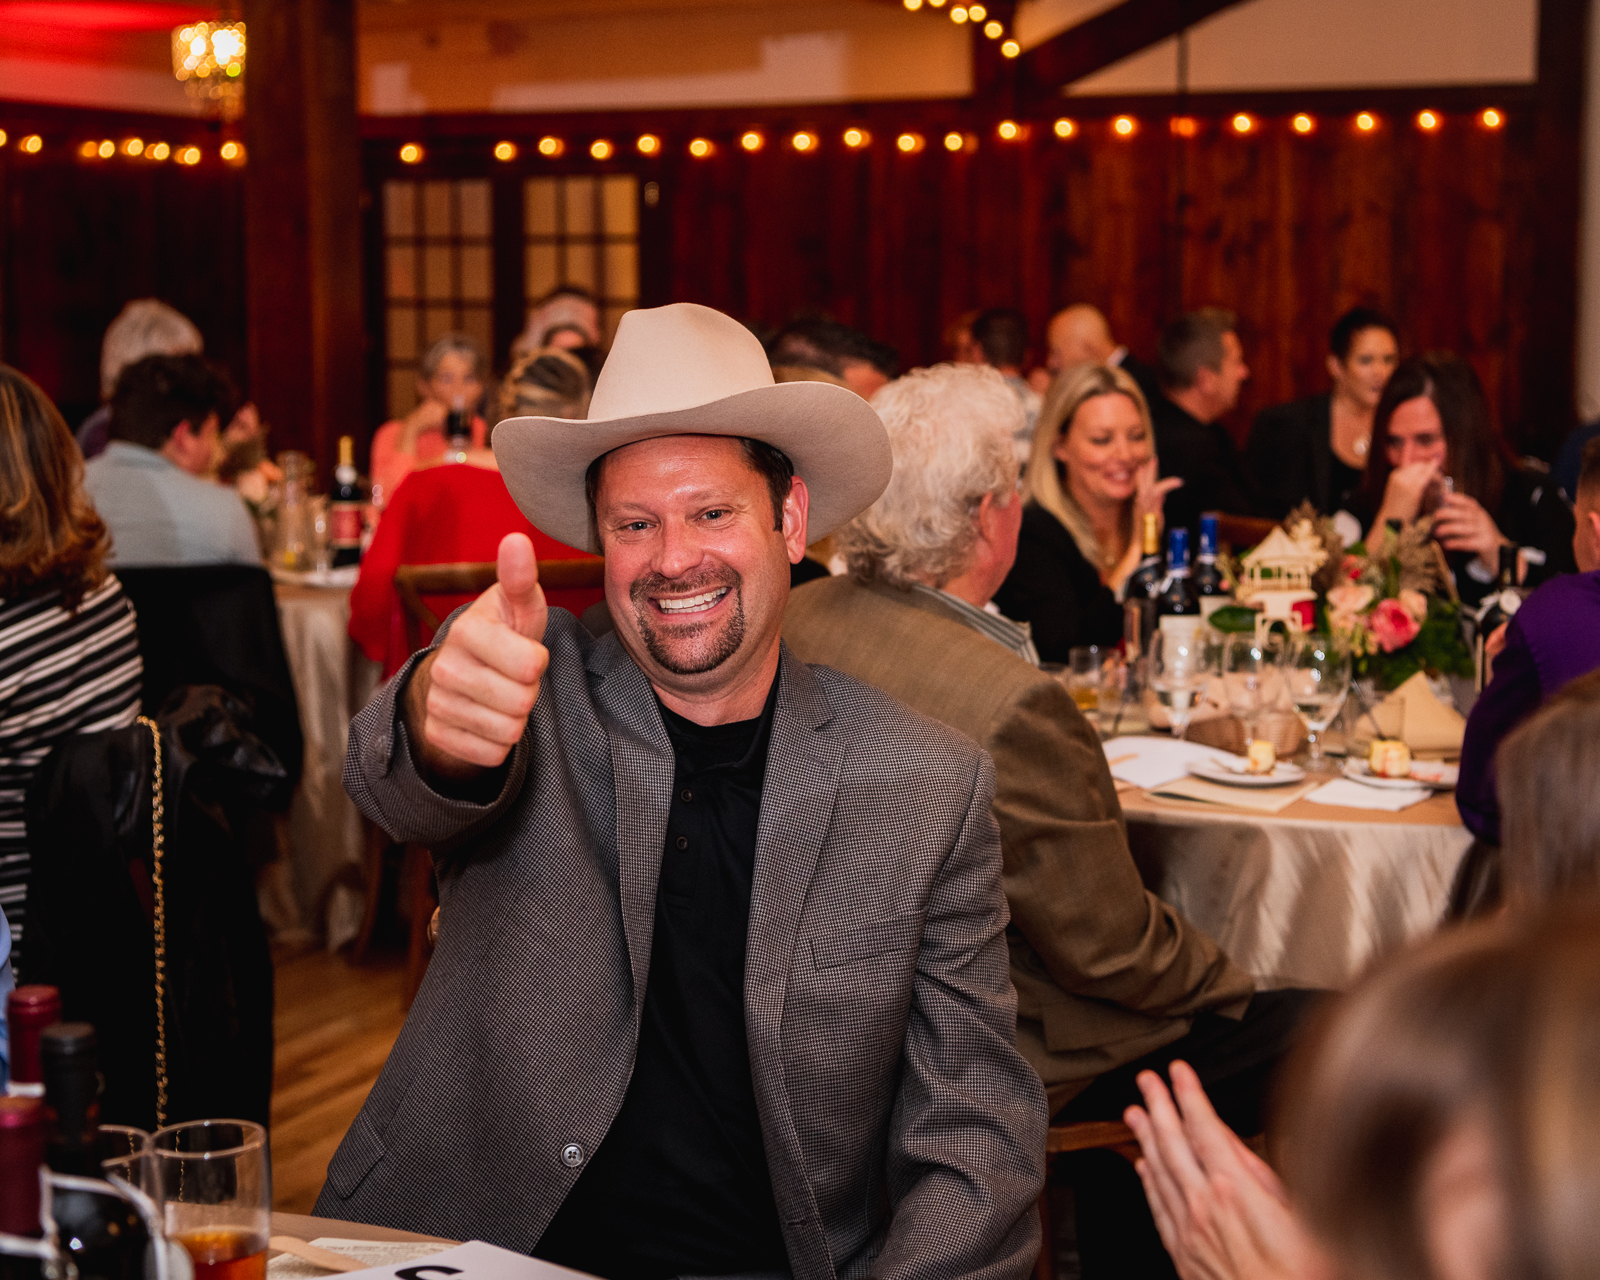 Columbia Foundation Fall Gala, charity event, donation, auction, prize winner, cowboy hat, thumbs up